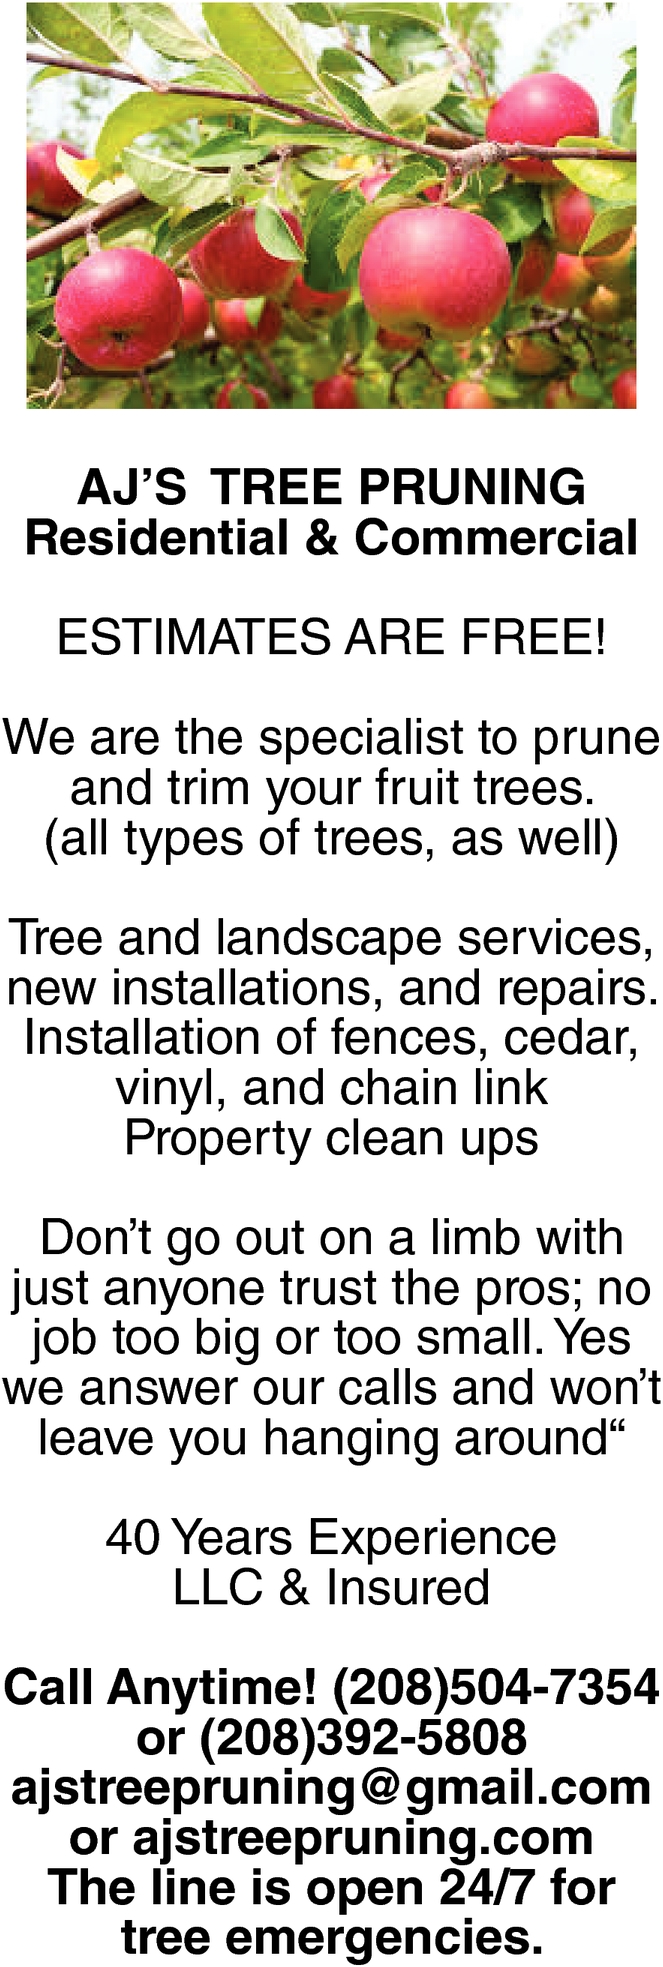 Residential & Commercial Tree Prunning